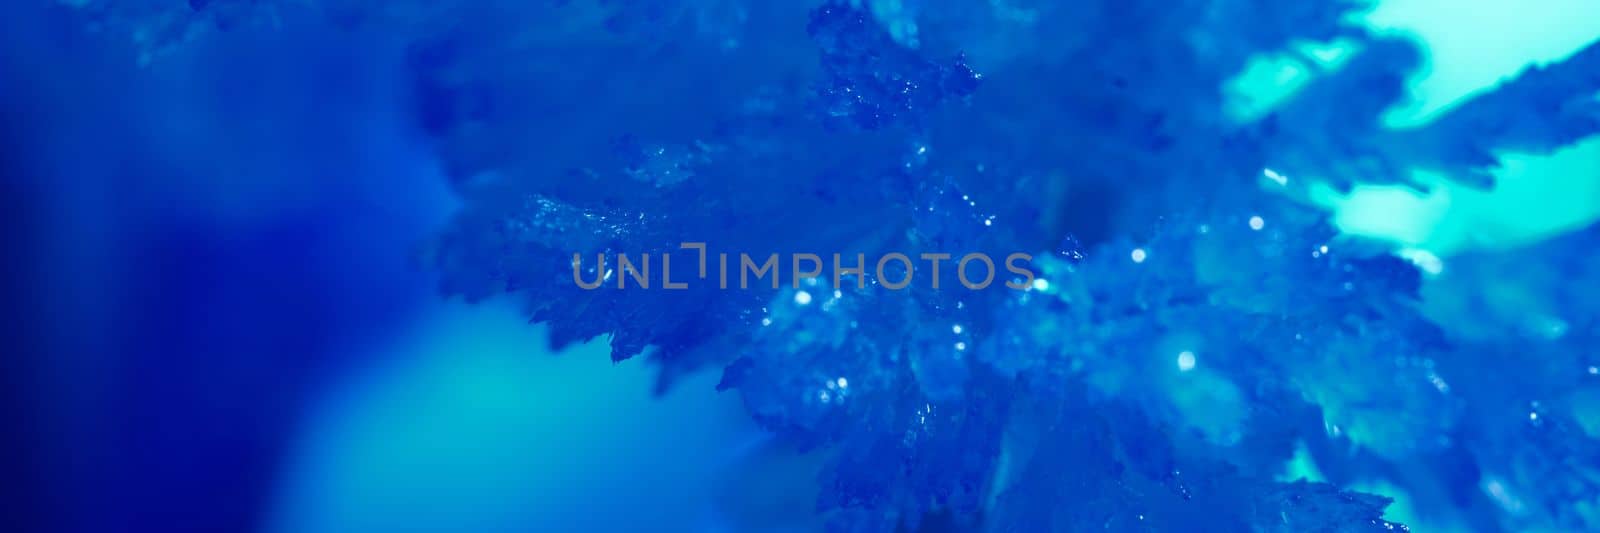 Christmas ornament dark blue ice window decoration wallpaper by kuprevich